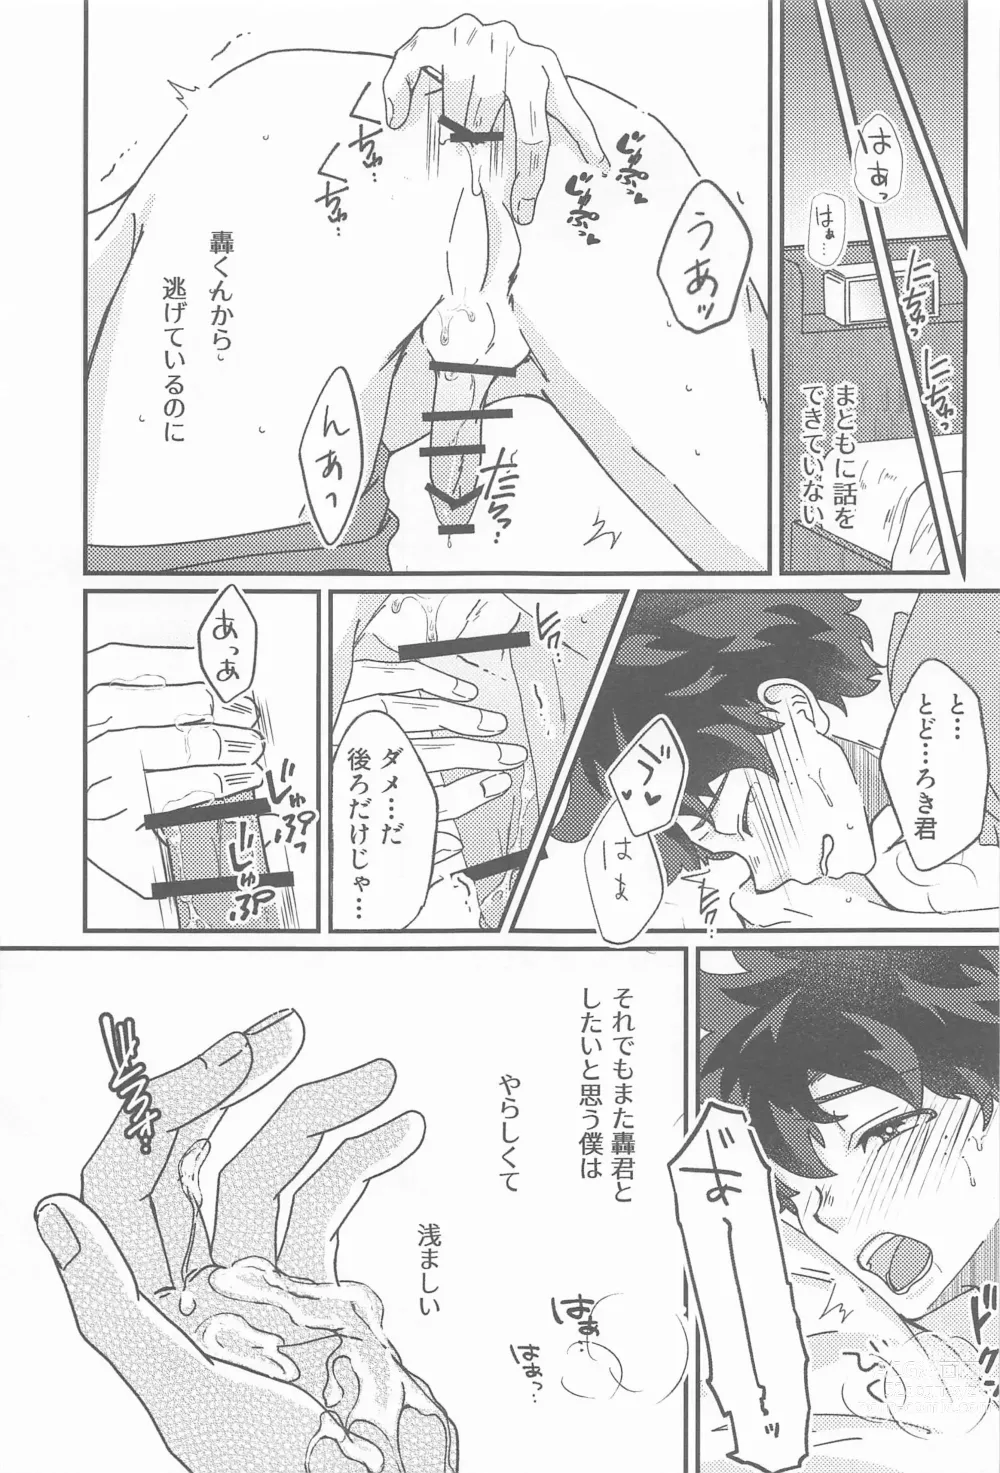 Page 8 of doujinshi Second Sweet